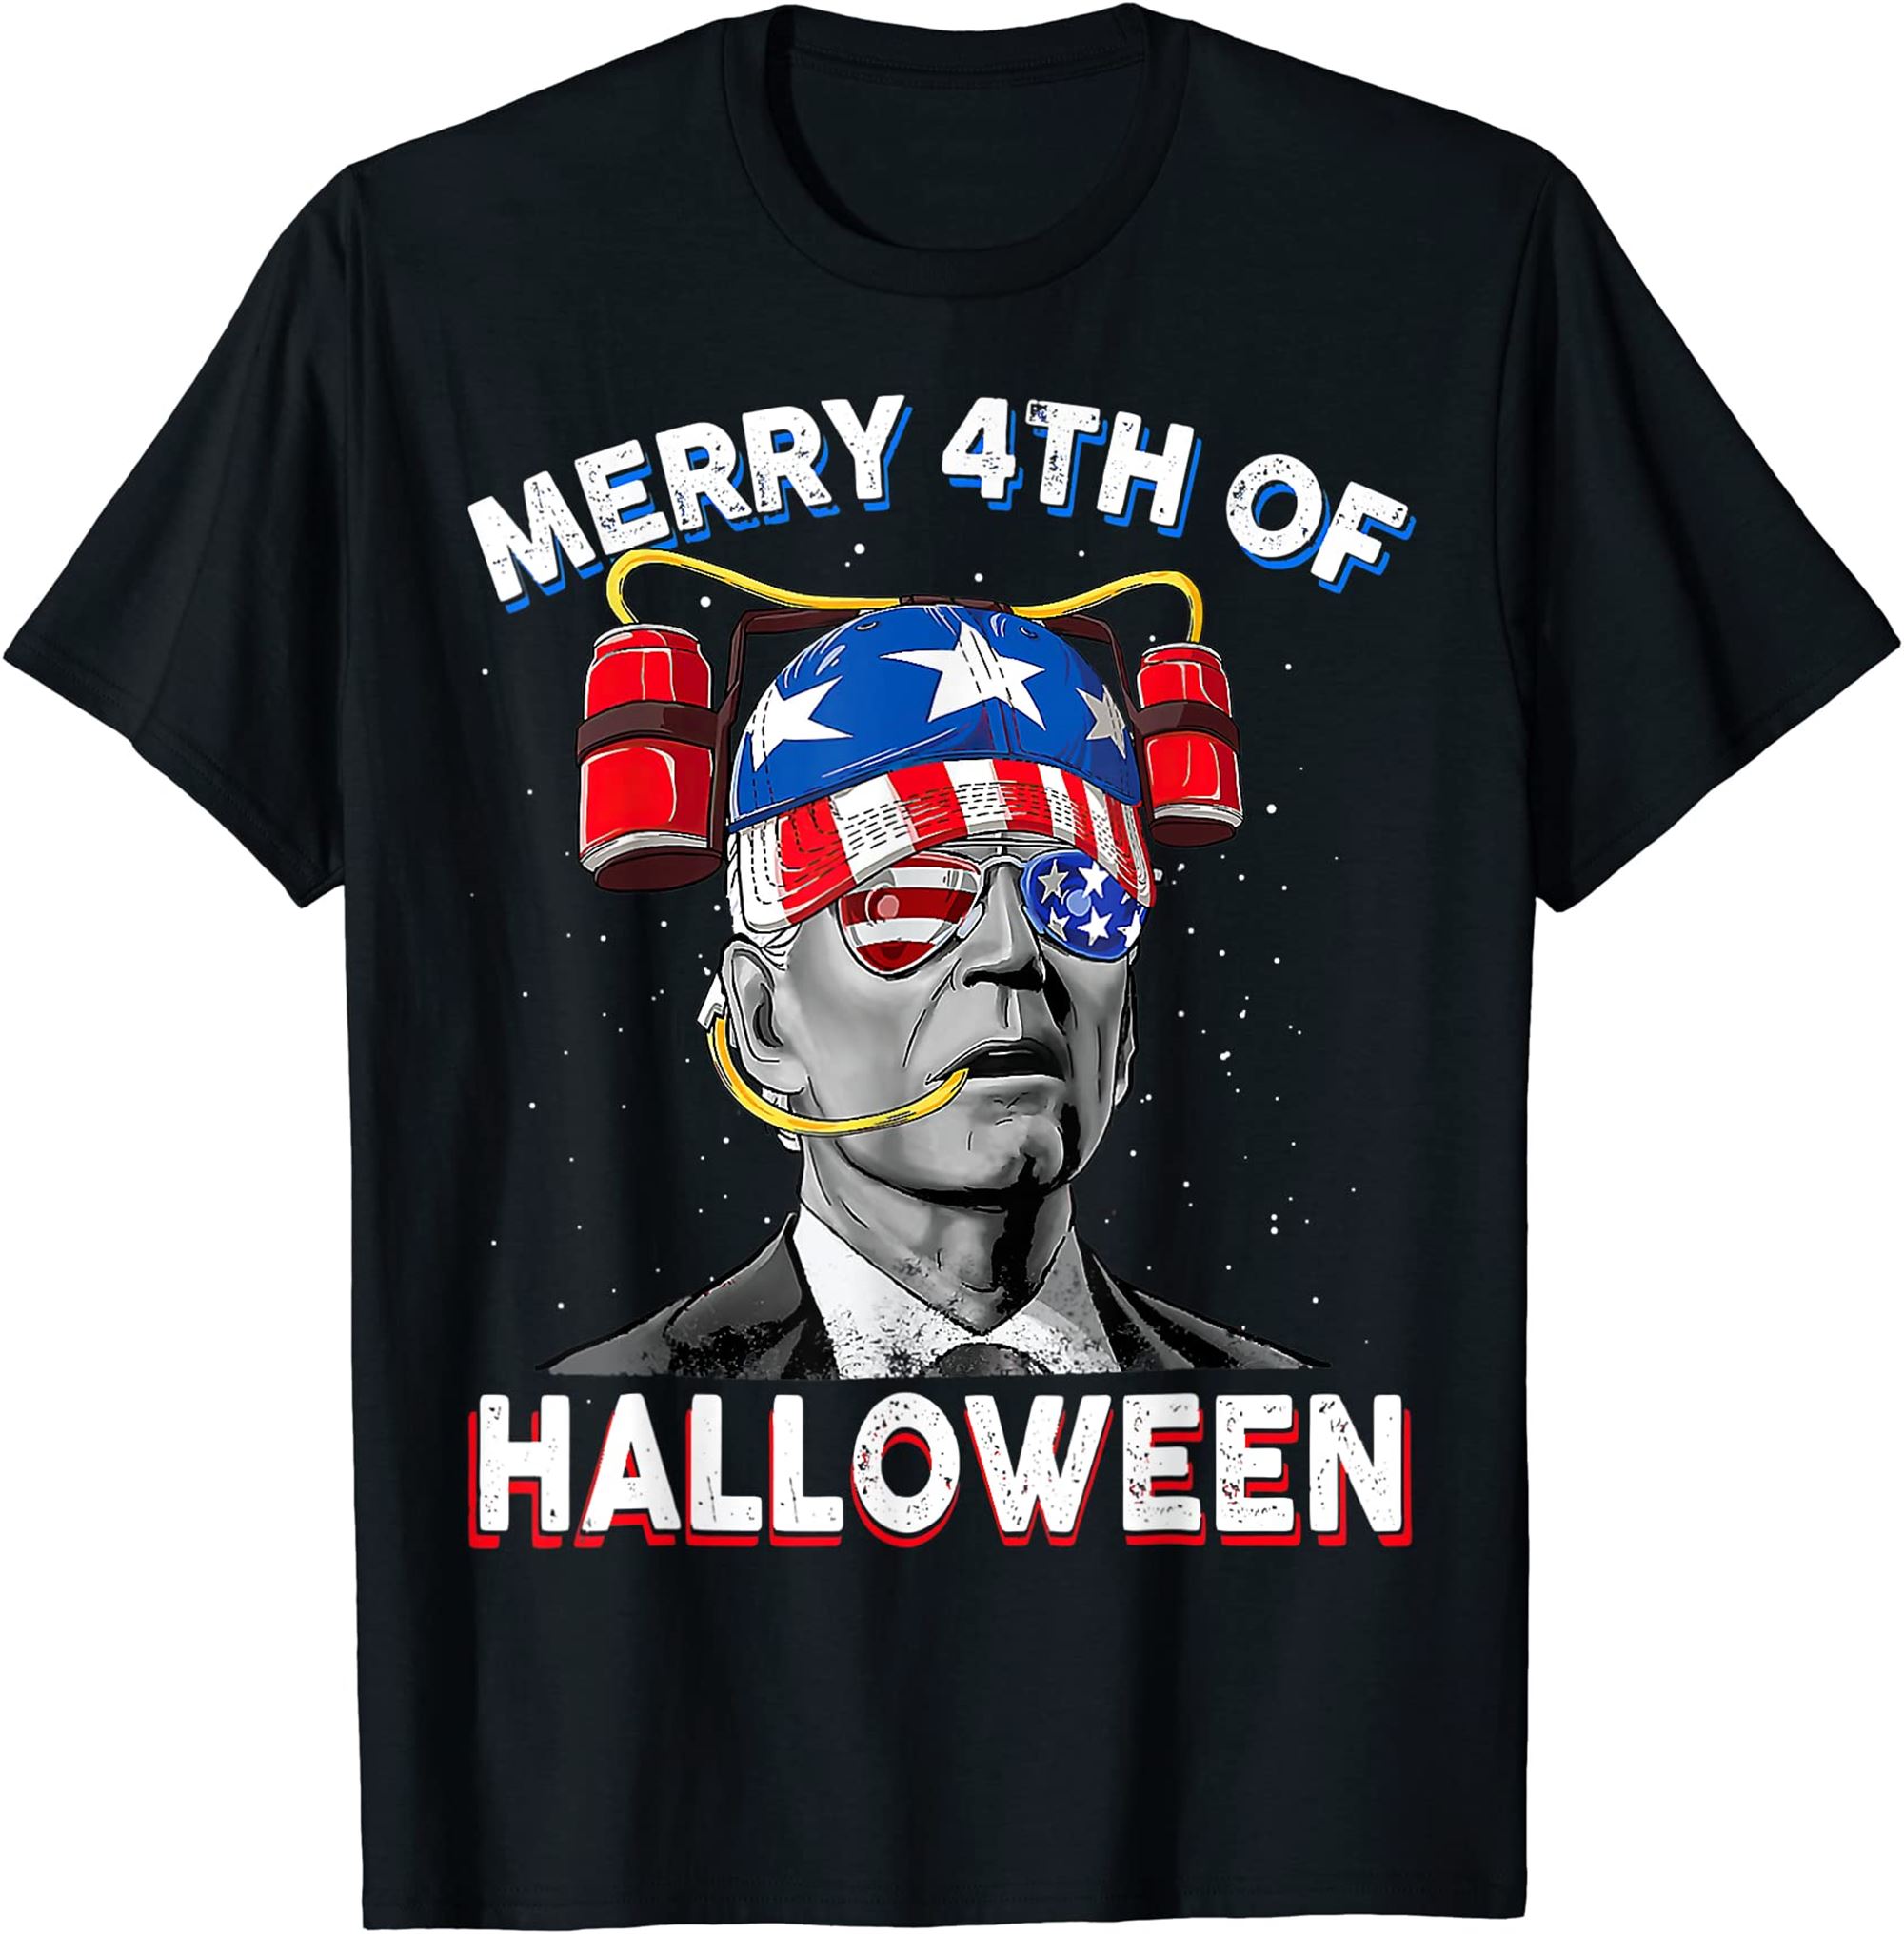 Fun Joe Biden Drink Beer 4th Of July Merry 4th Of Halloween T-shirt Full Size Up To 5xl